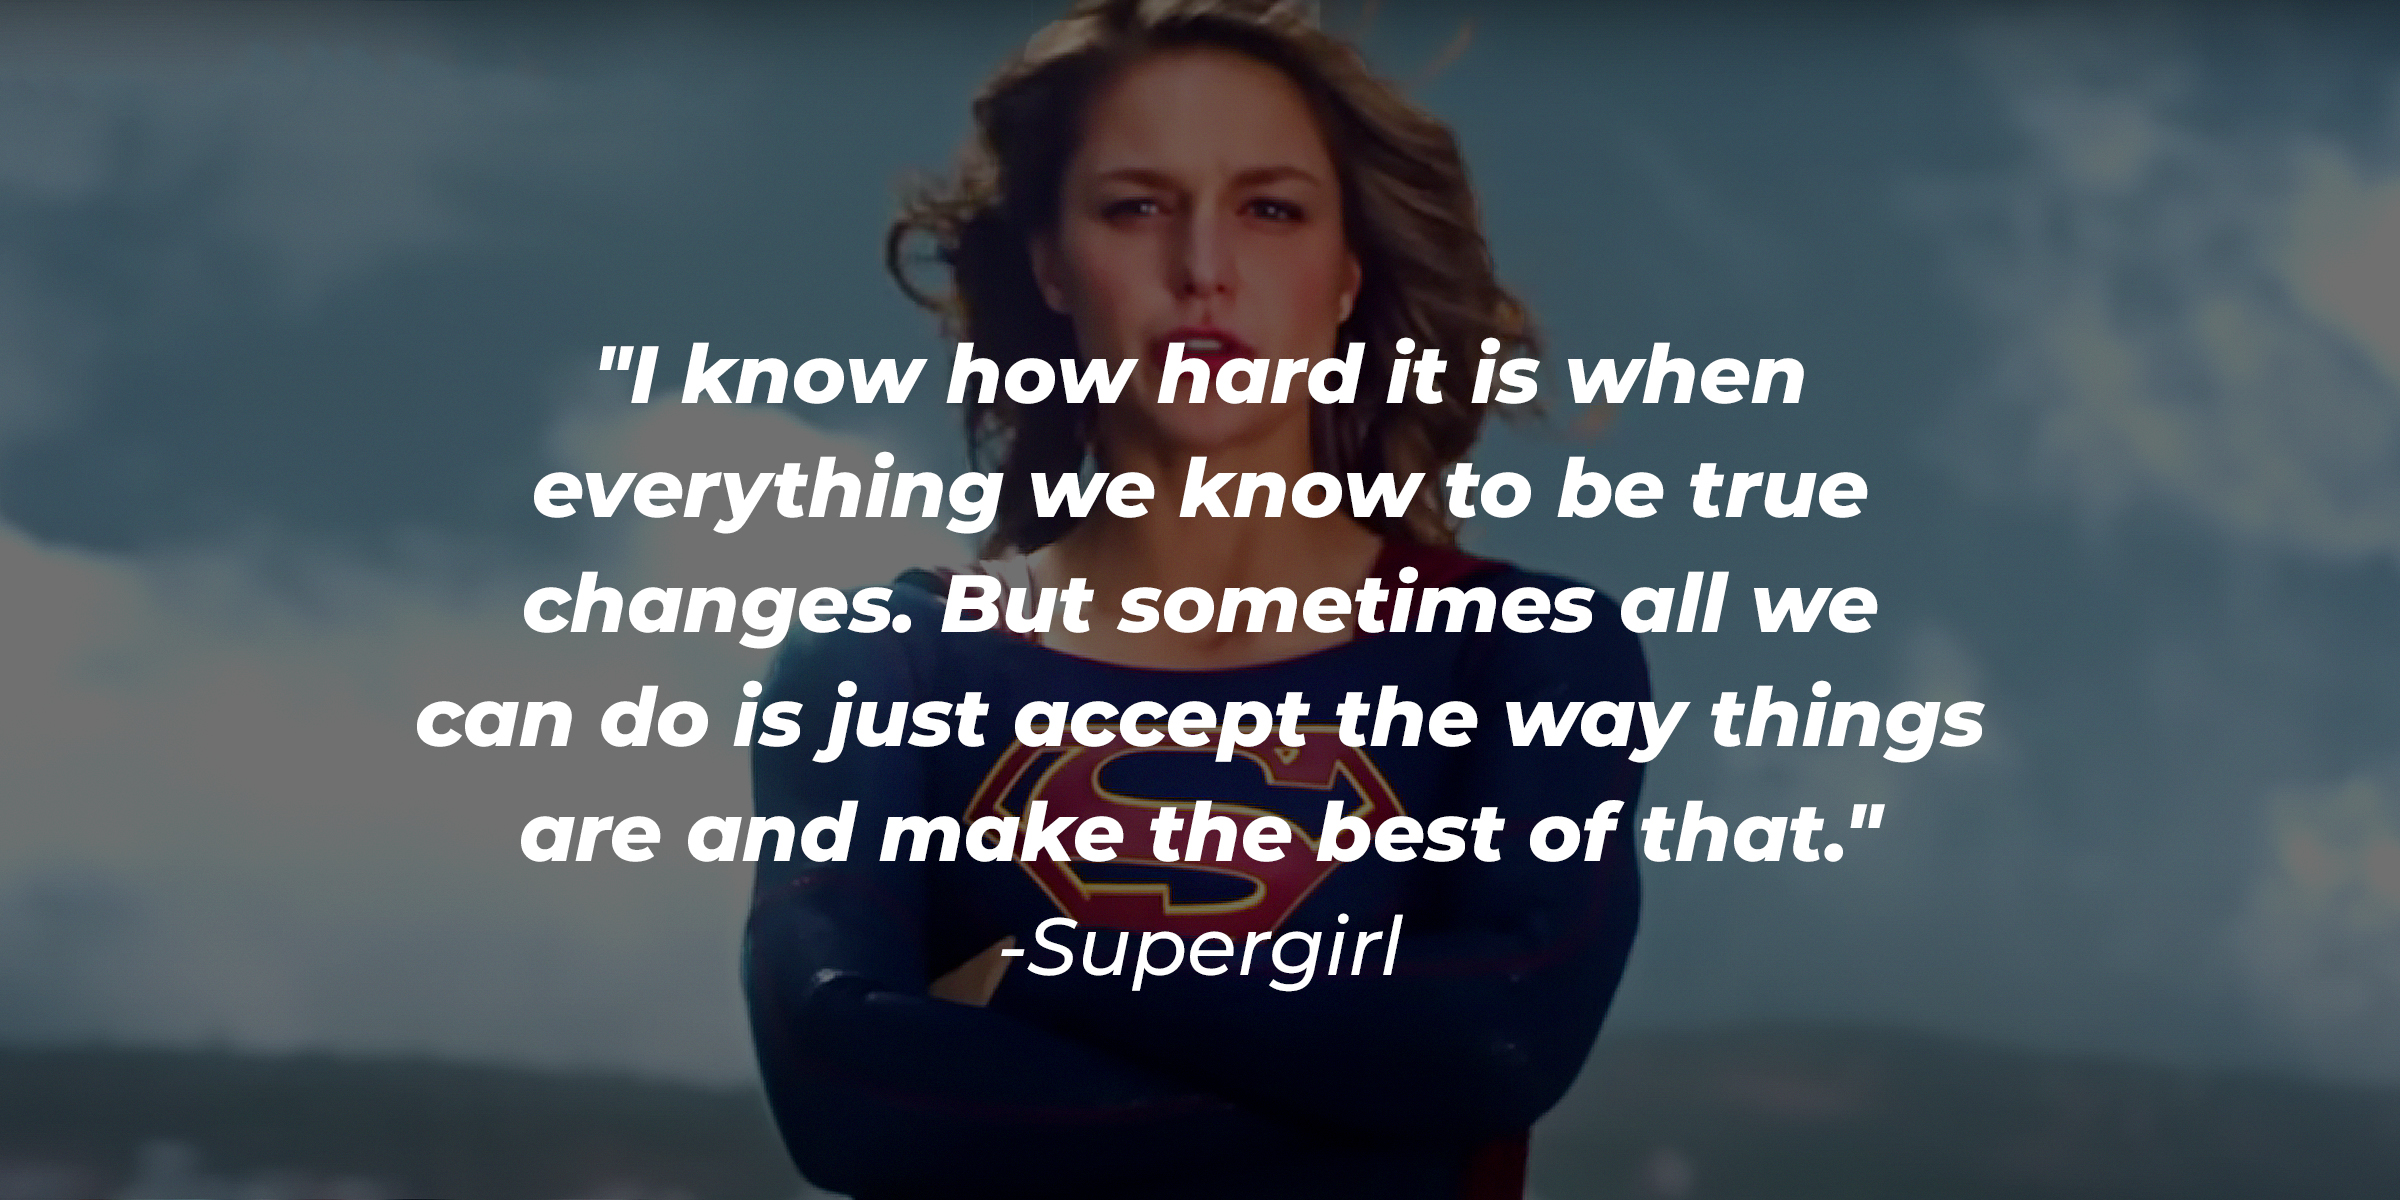 Supergirl and her quote: "I know how hard it is when everything we know to be true changes. But sometimes all we can do is just accept the way things are and make the best of that." | Source: Youtube/DCSuperHeroGirls